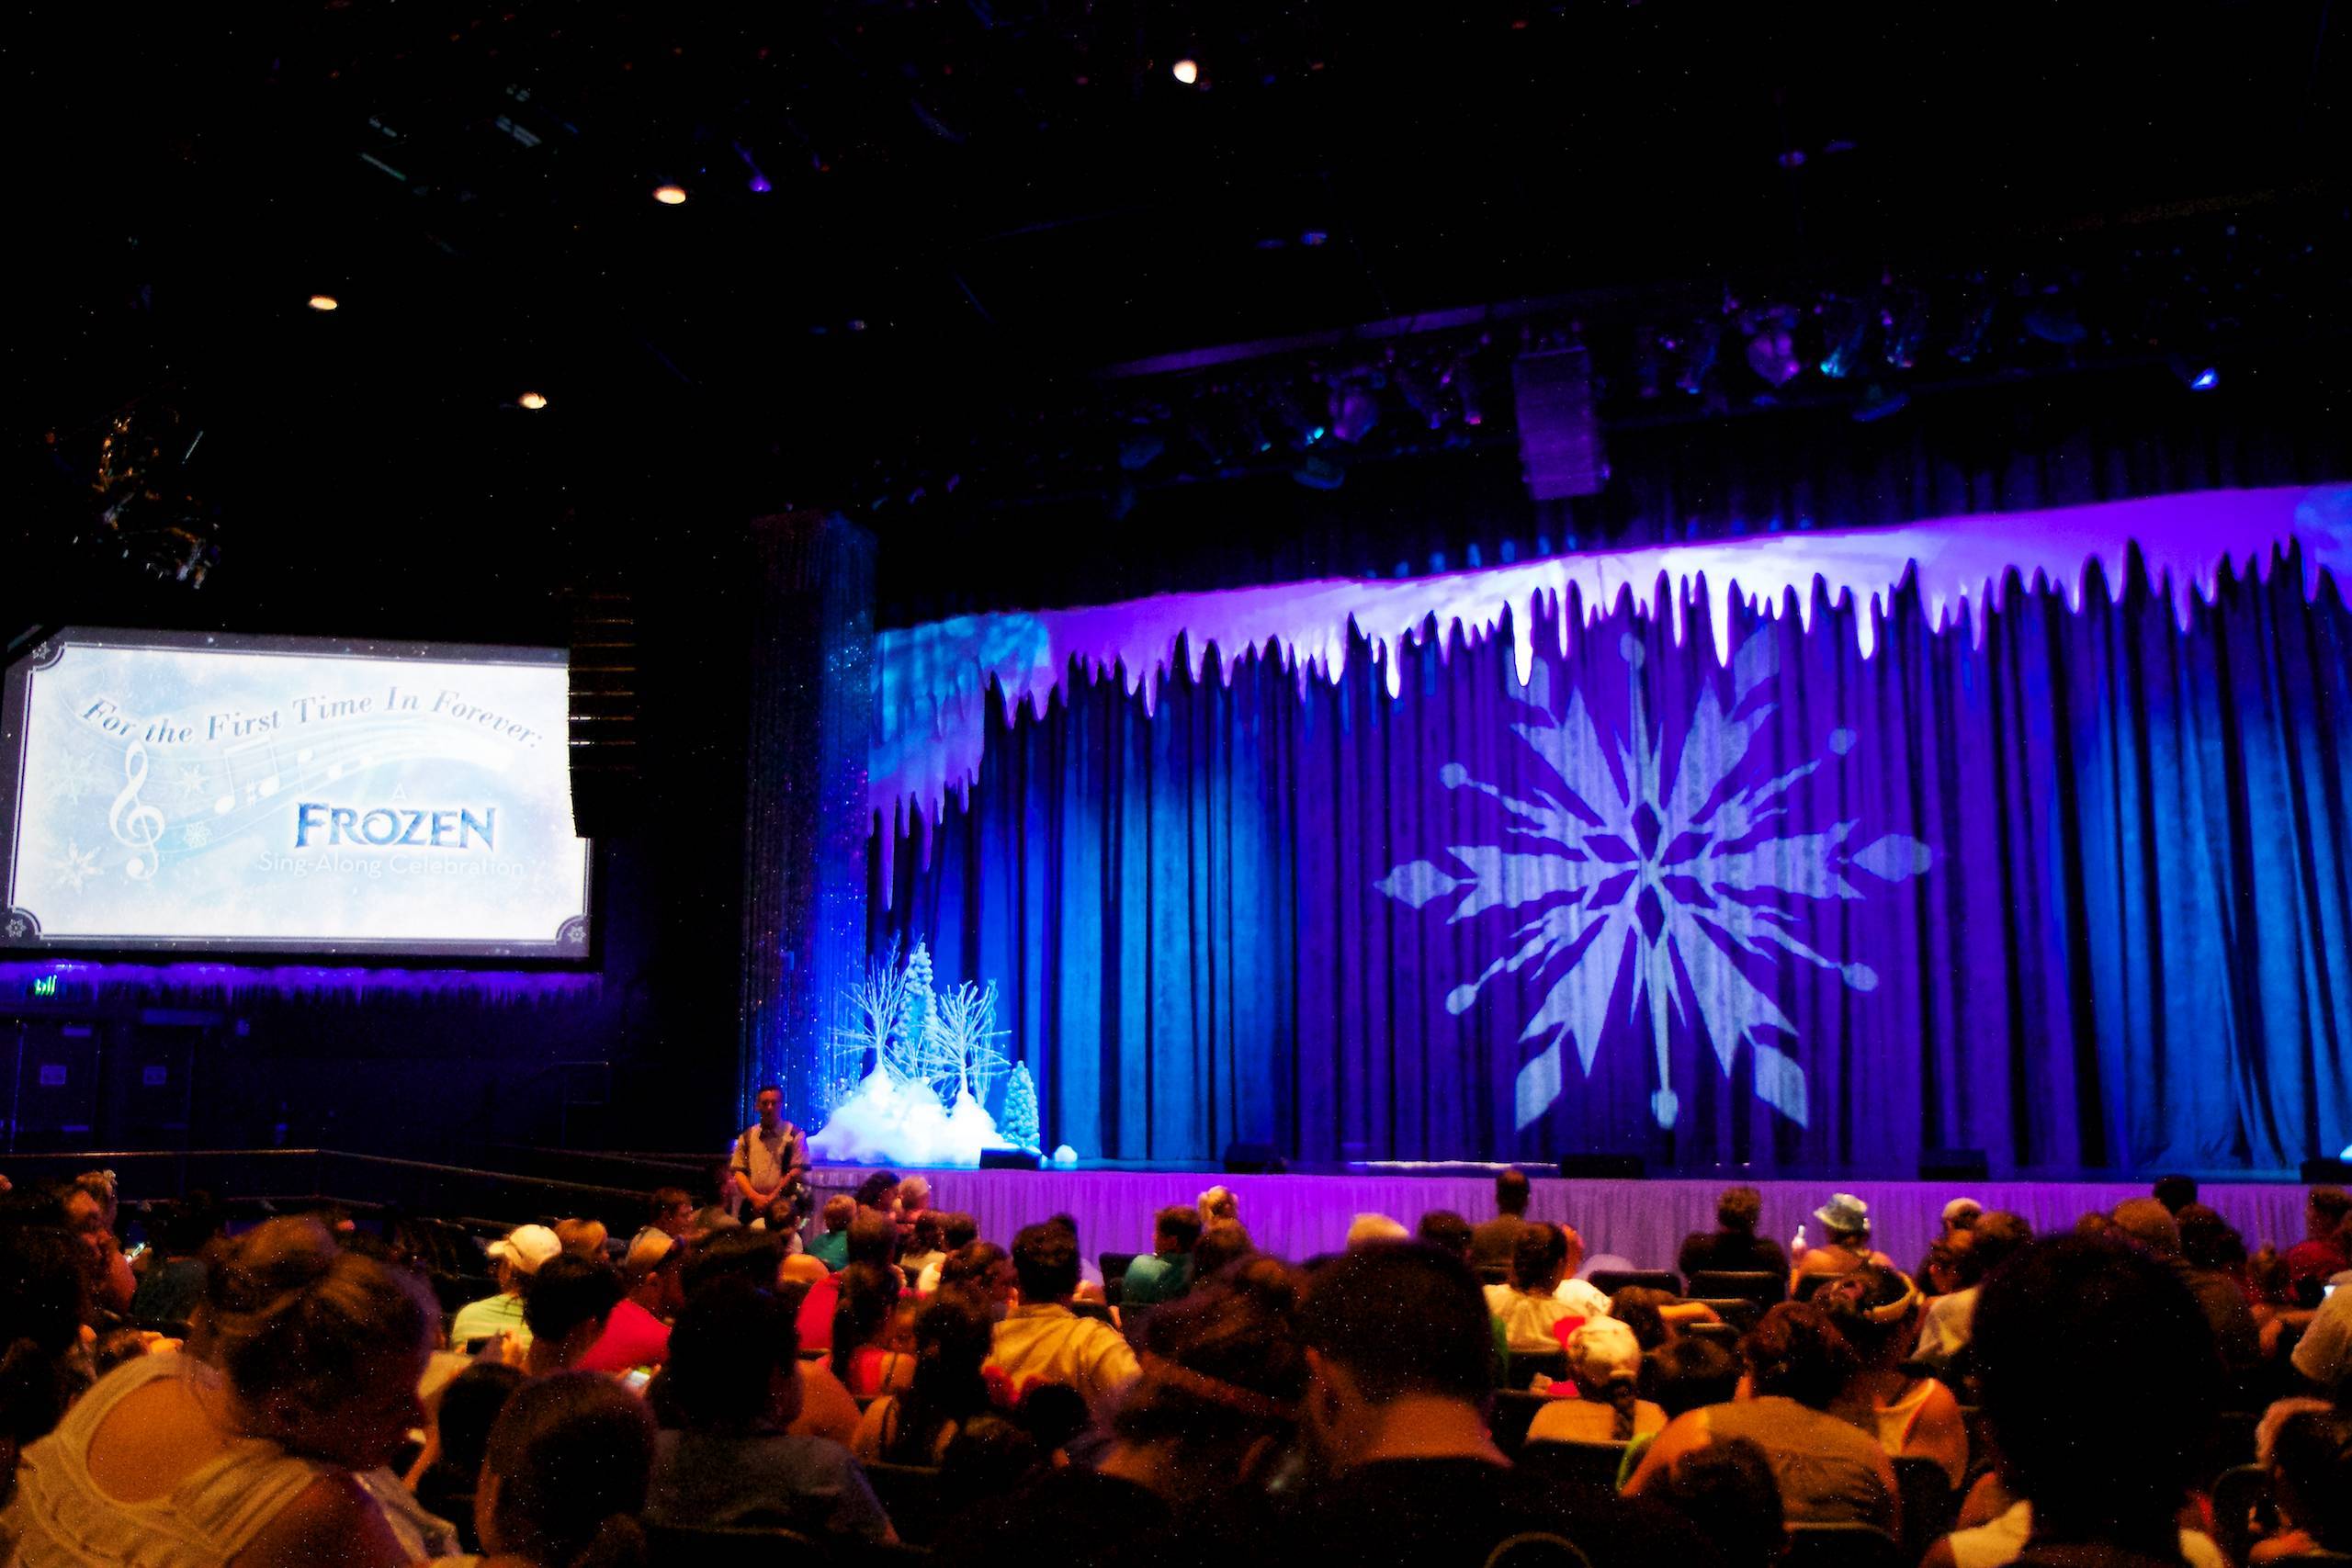 Frozen Summer Fun - For The First Time in Forever: A Frozen Sing-Along Celebration stage